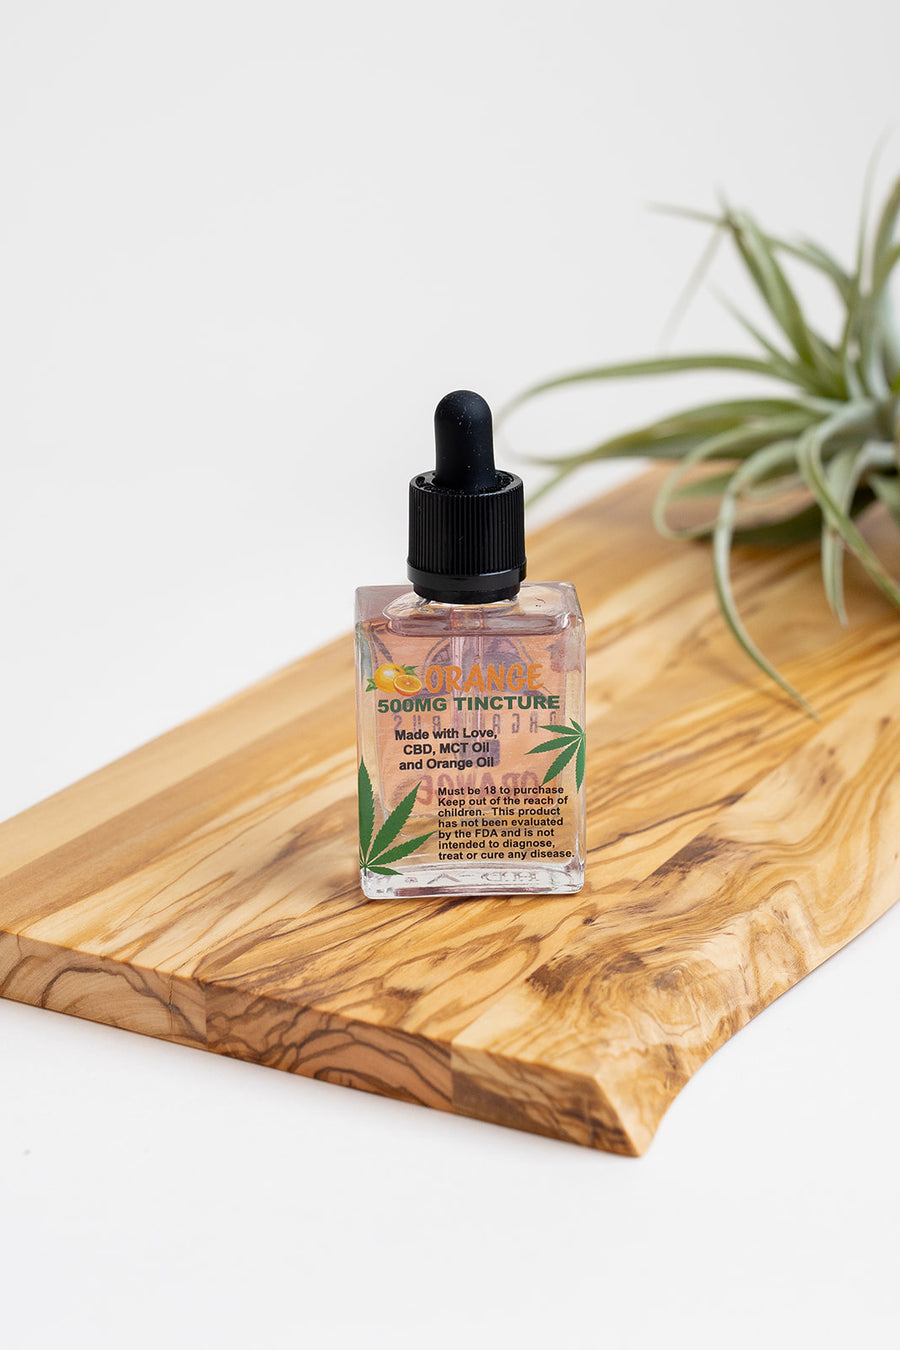 THC free tinctures made with 99.9% pure CBD isolate